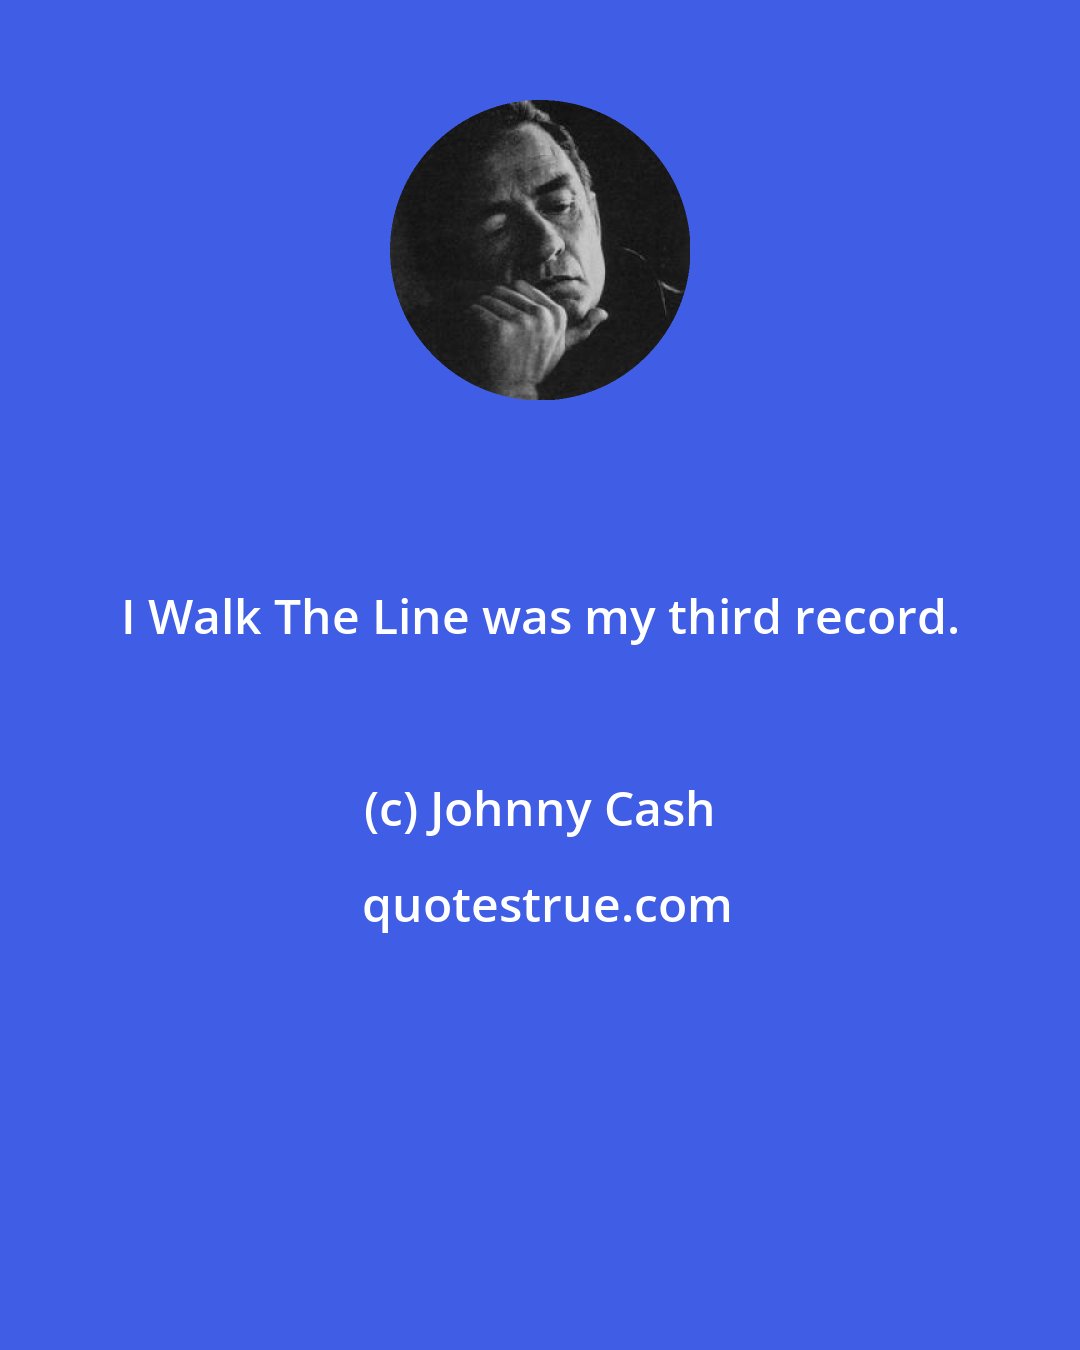 Johnny Cash: I Walk The Line was my third record.